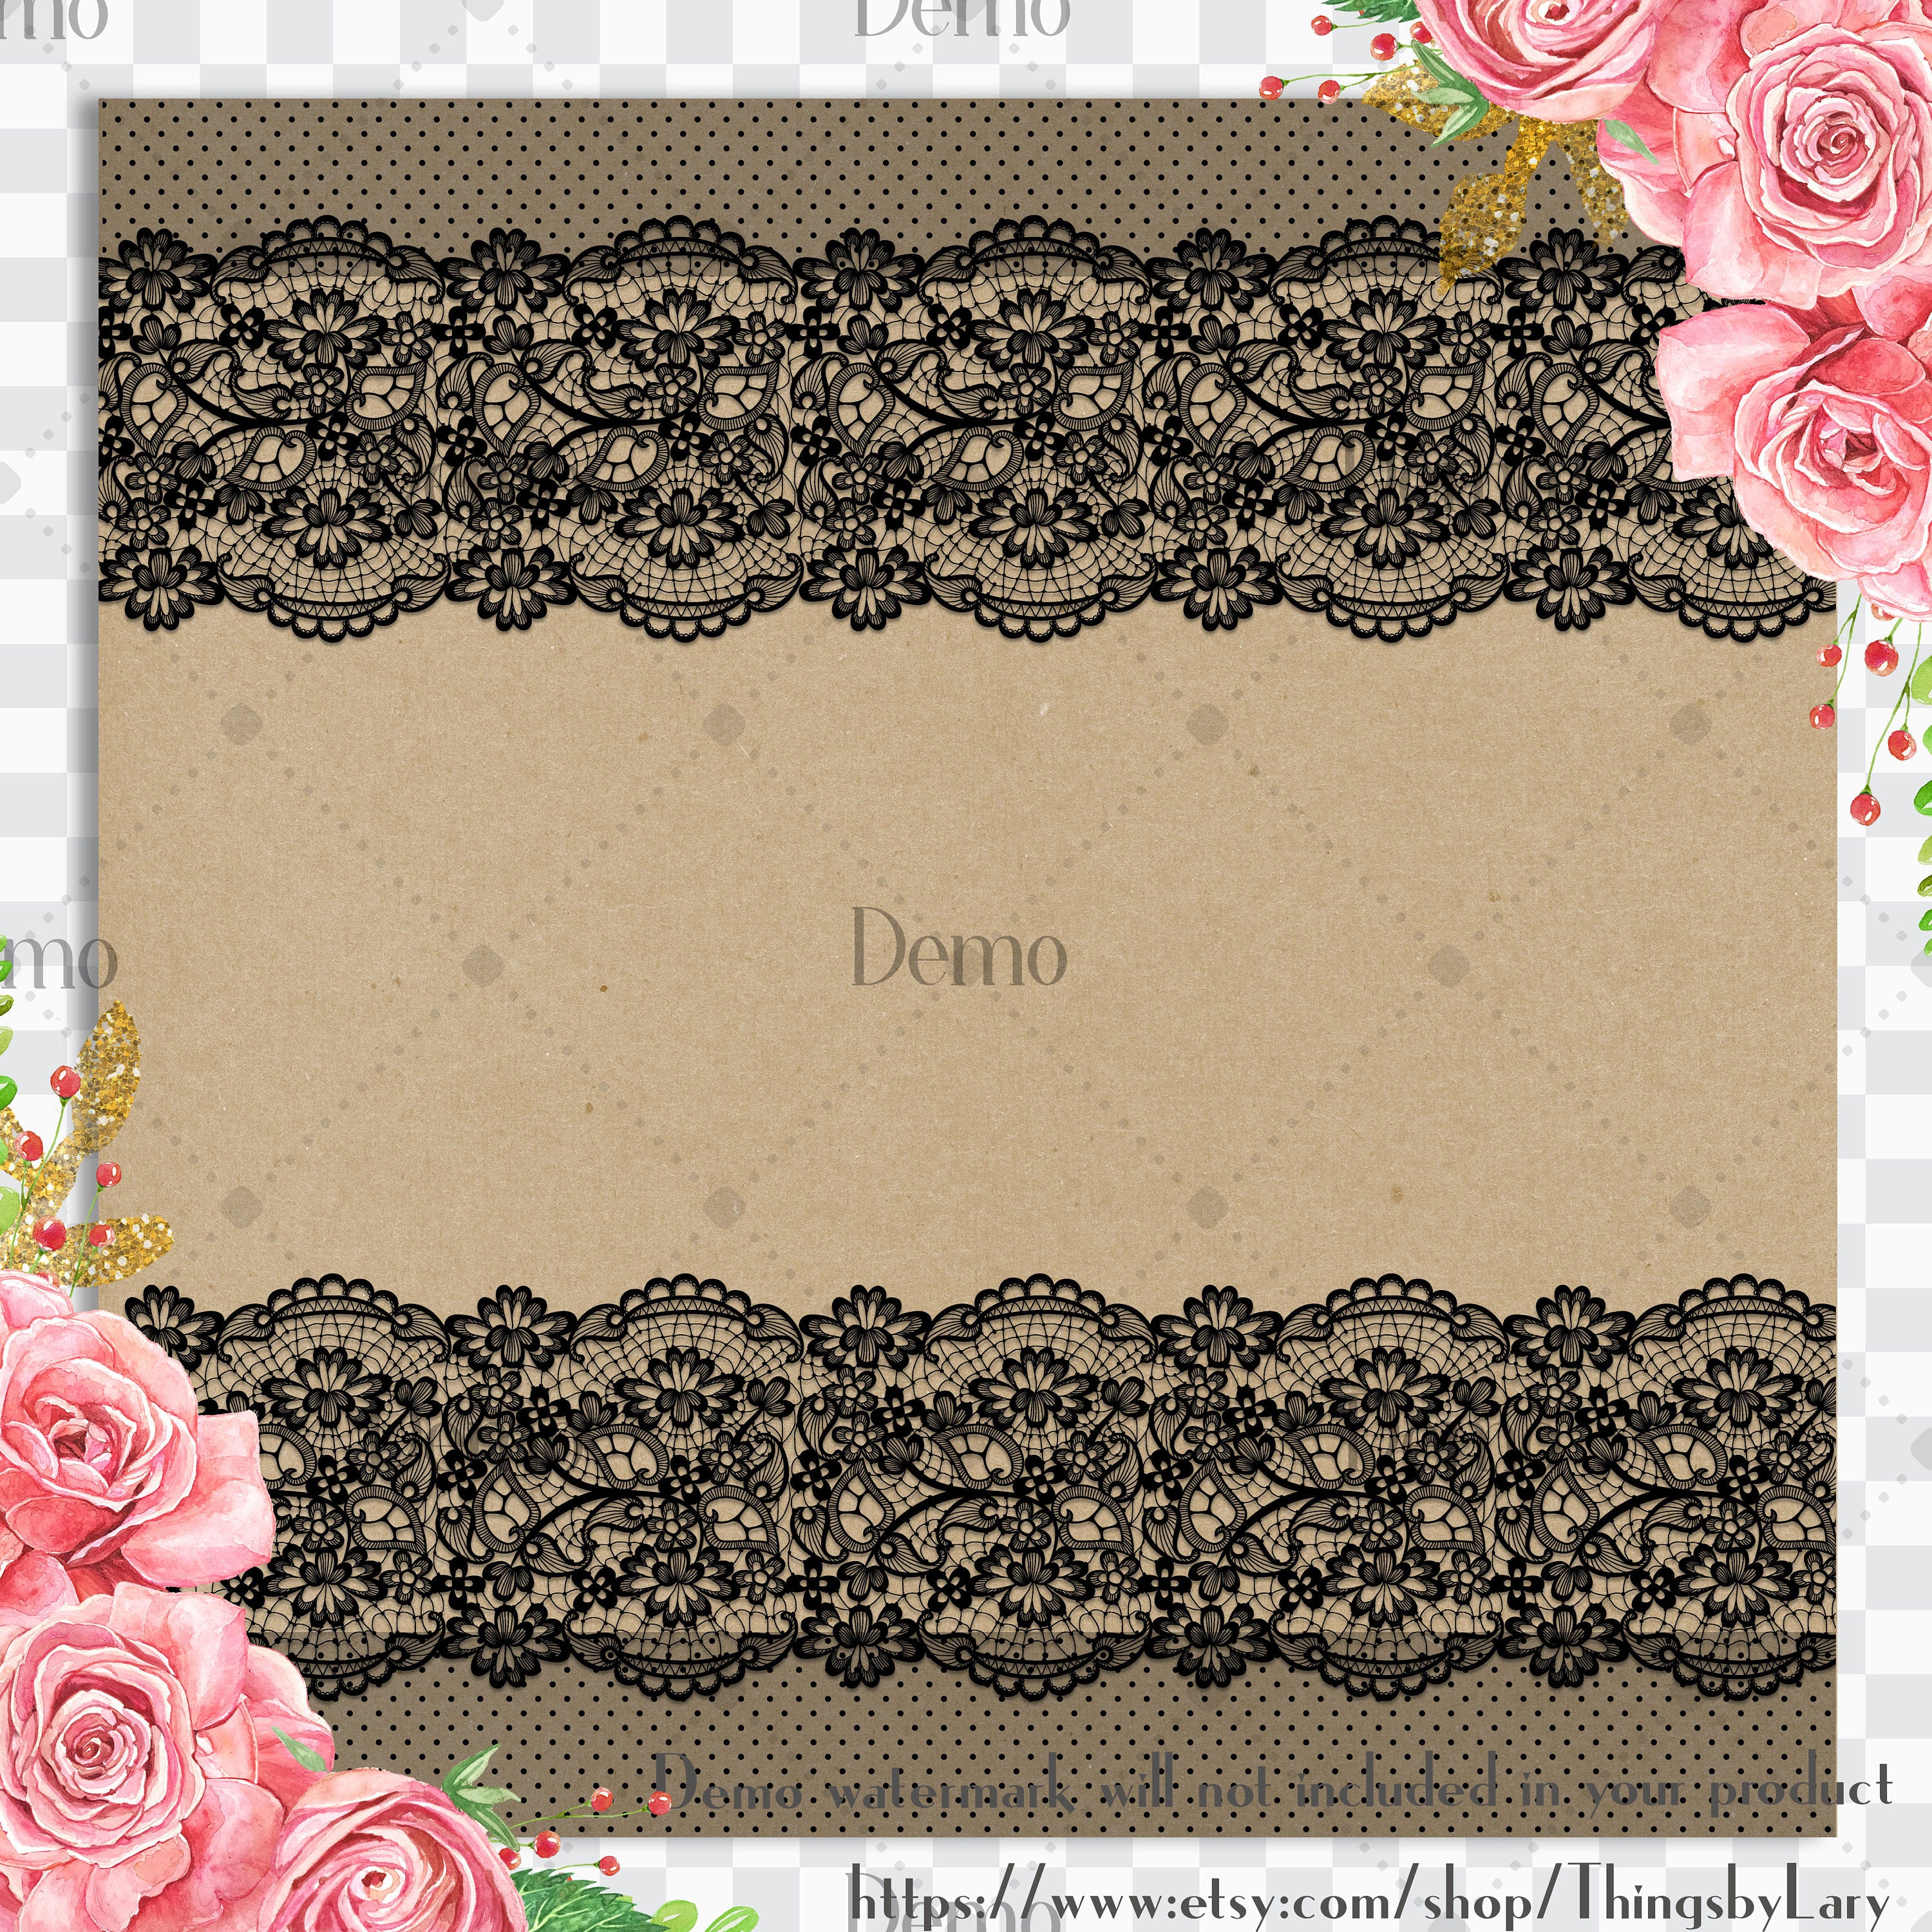 16 Black Gothic Lace Digital Papers 12inch 300 dpi commercial use instant download, Gothic Lace, Black Halloween Lace, Scrapbooking Lace Kit